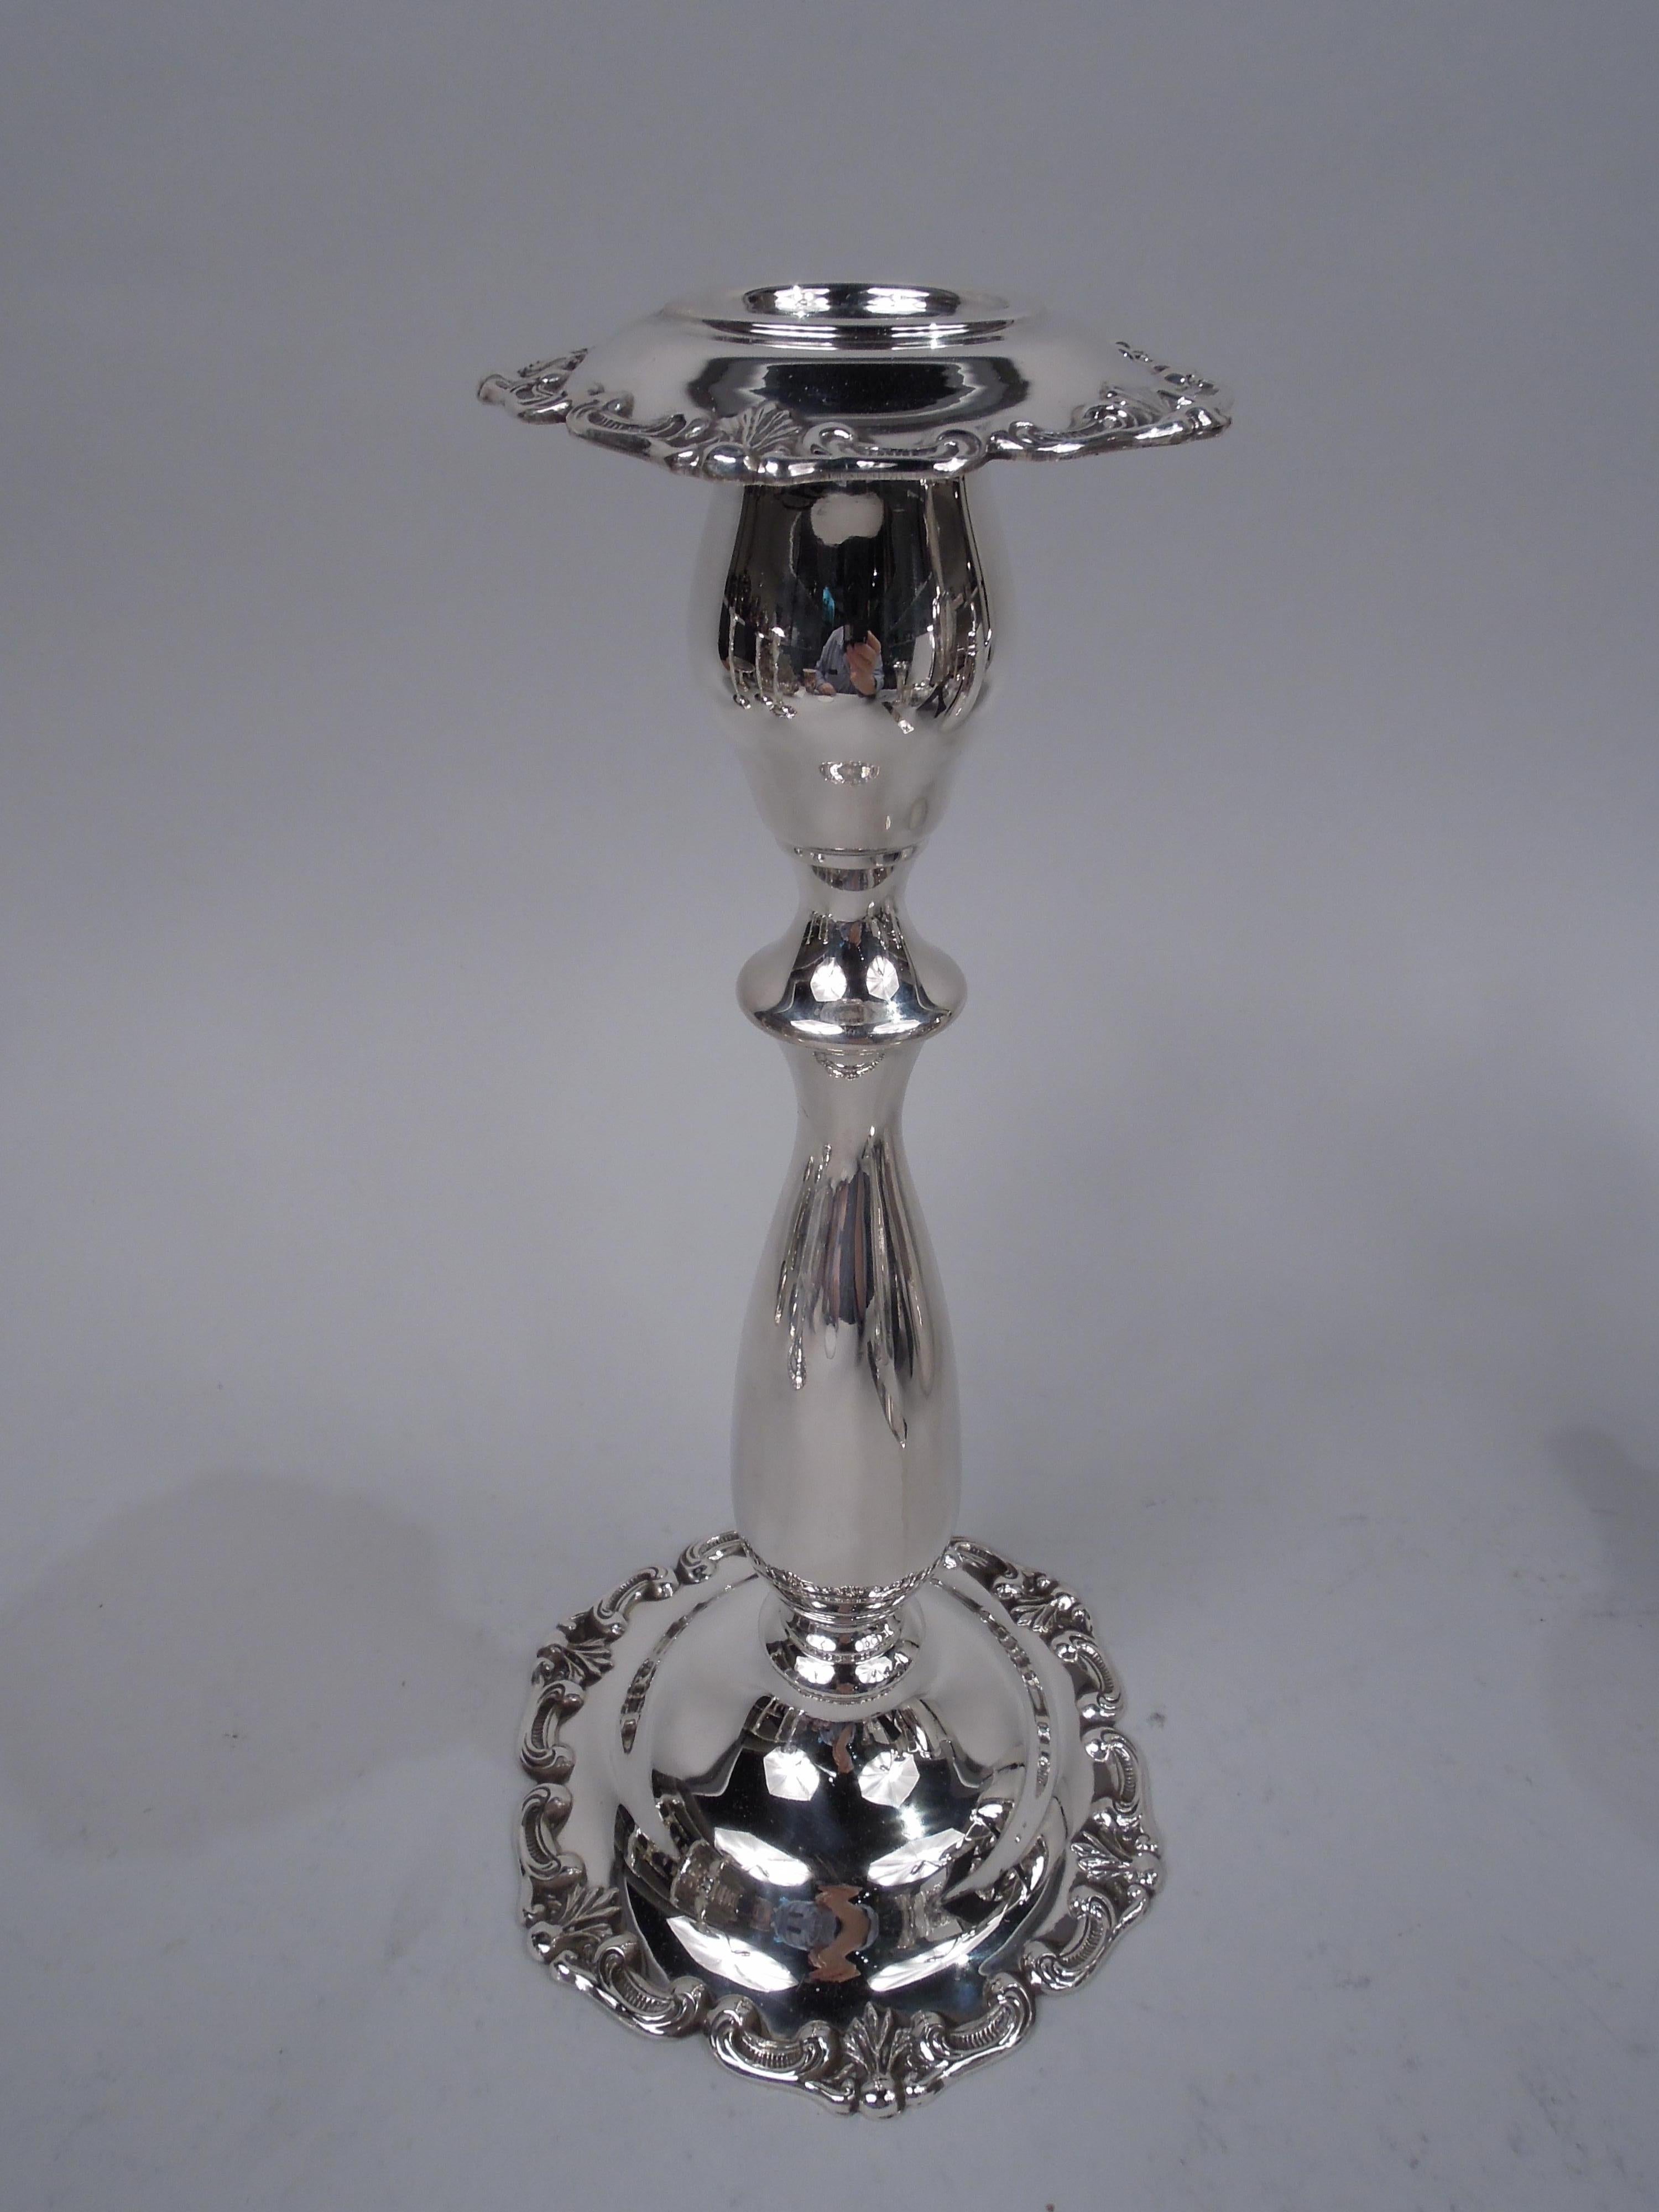 Pair of pretty Edwardian sterling silver candlesticks. Made by Fisher Silversmiths, Inc. in Jersey City, ca 1950. Each: Ovoid socket with detachable and turned-down bobeche; baluster shaft on domed foot. Rims have applied shells and scrolls. Fully